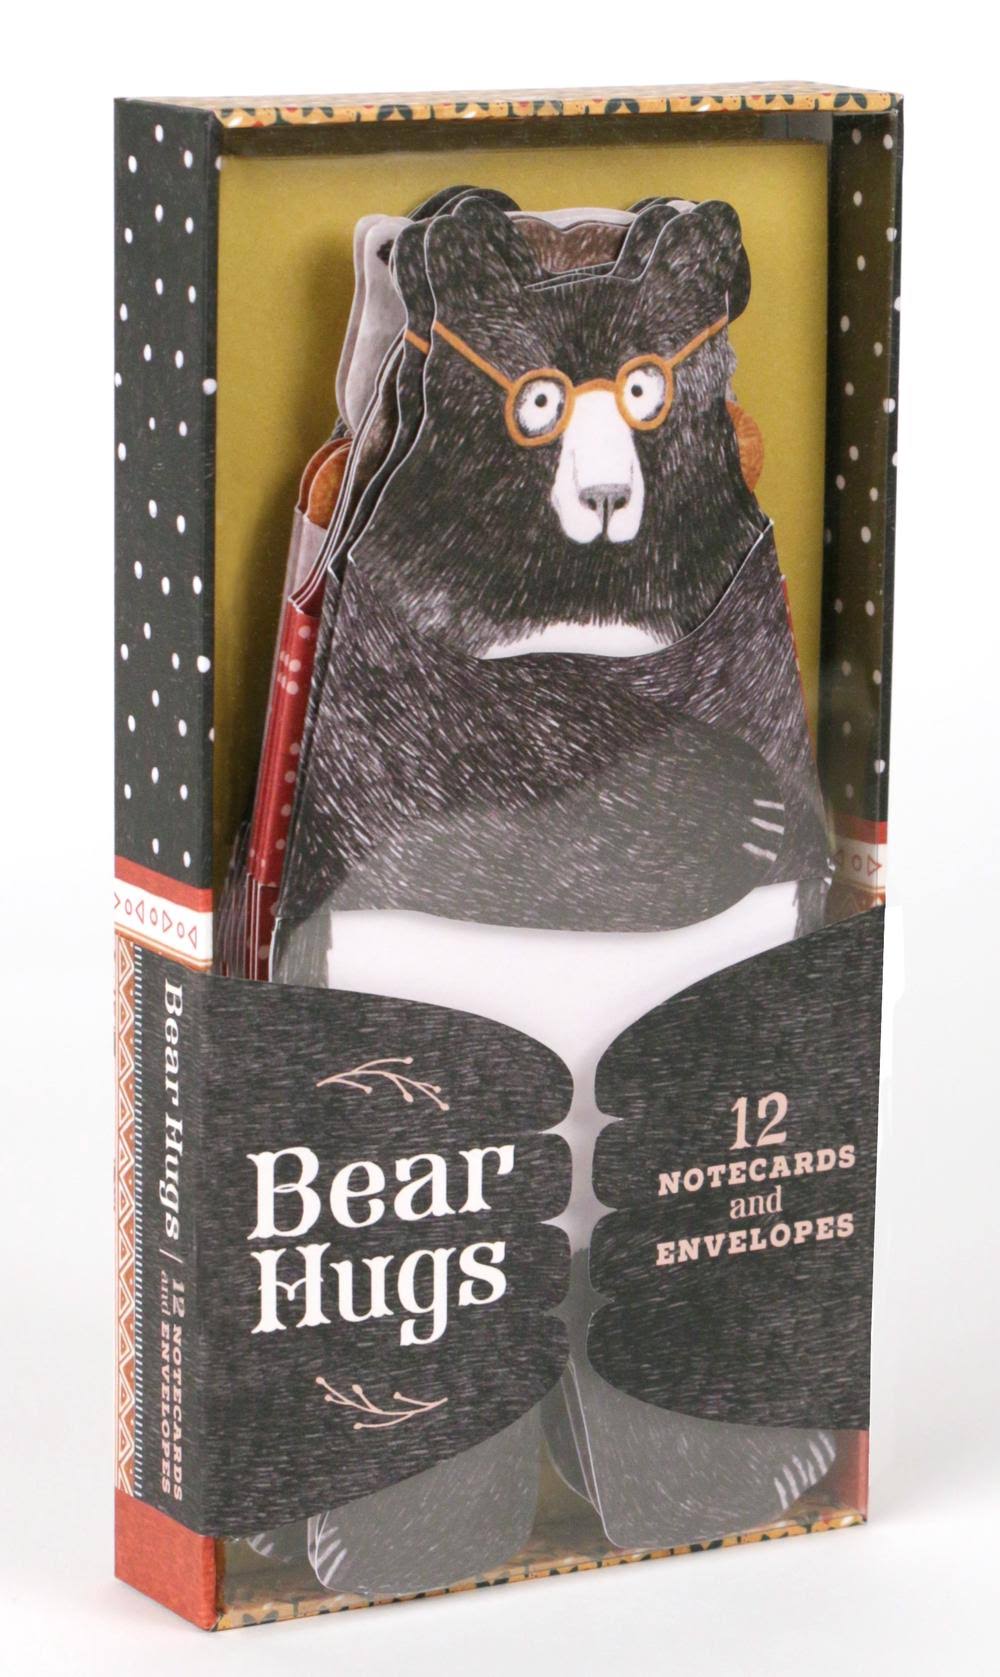 Bear Hugs: 12 Notecards and Envelopes by Chronicle Books